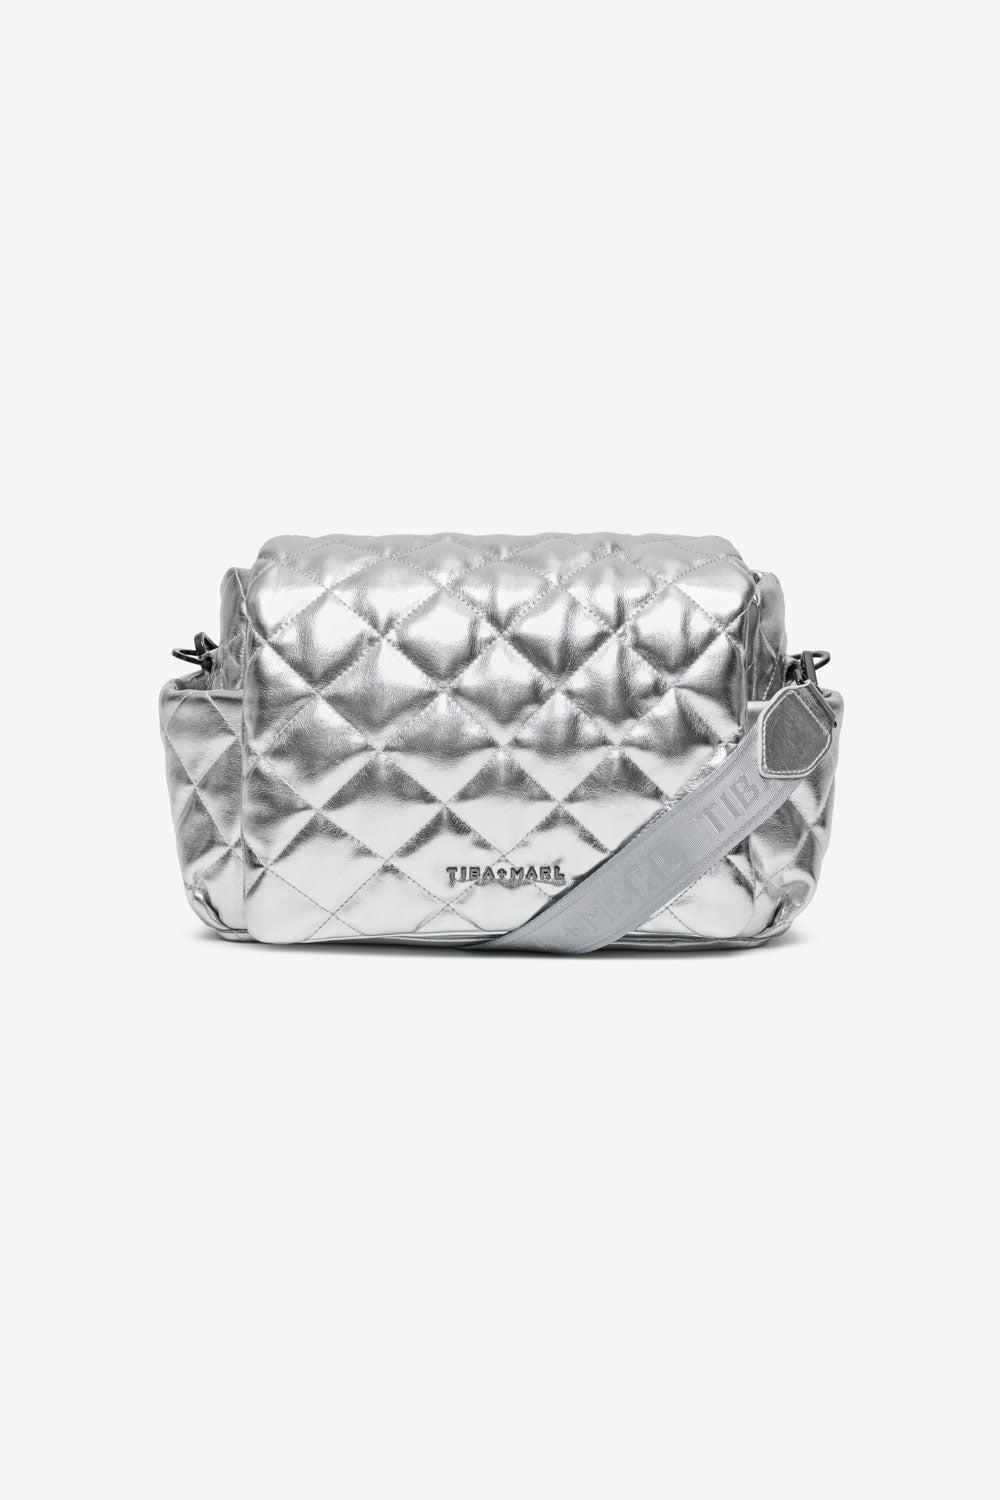 T+M x Selfridges Chain Nova Compact Changing Bag Silver Quilted Faux Leather